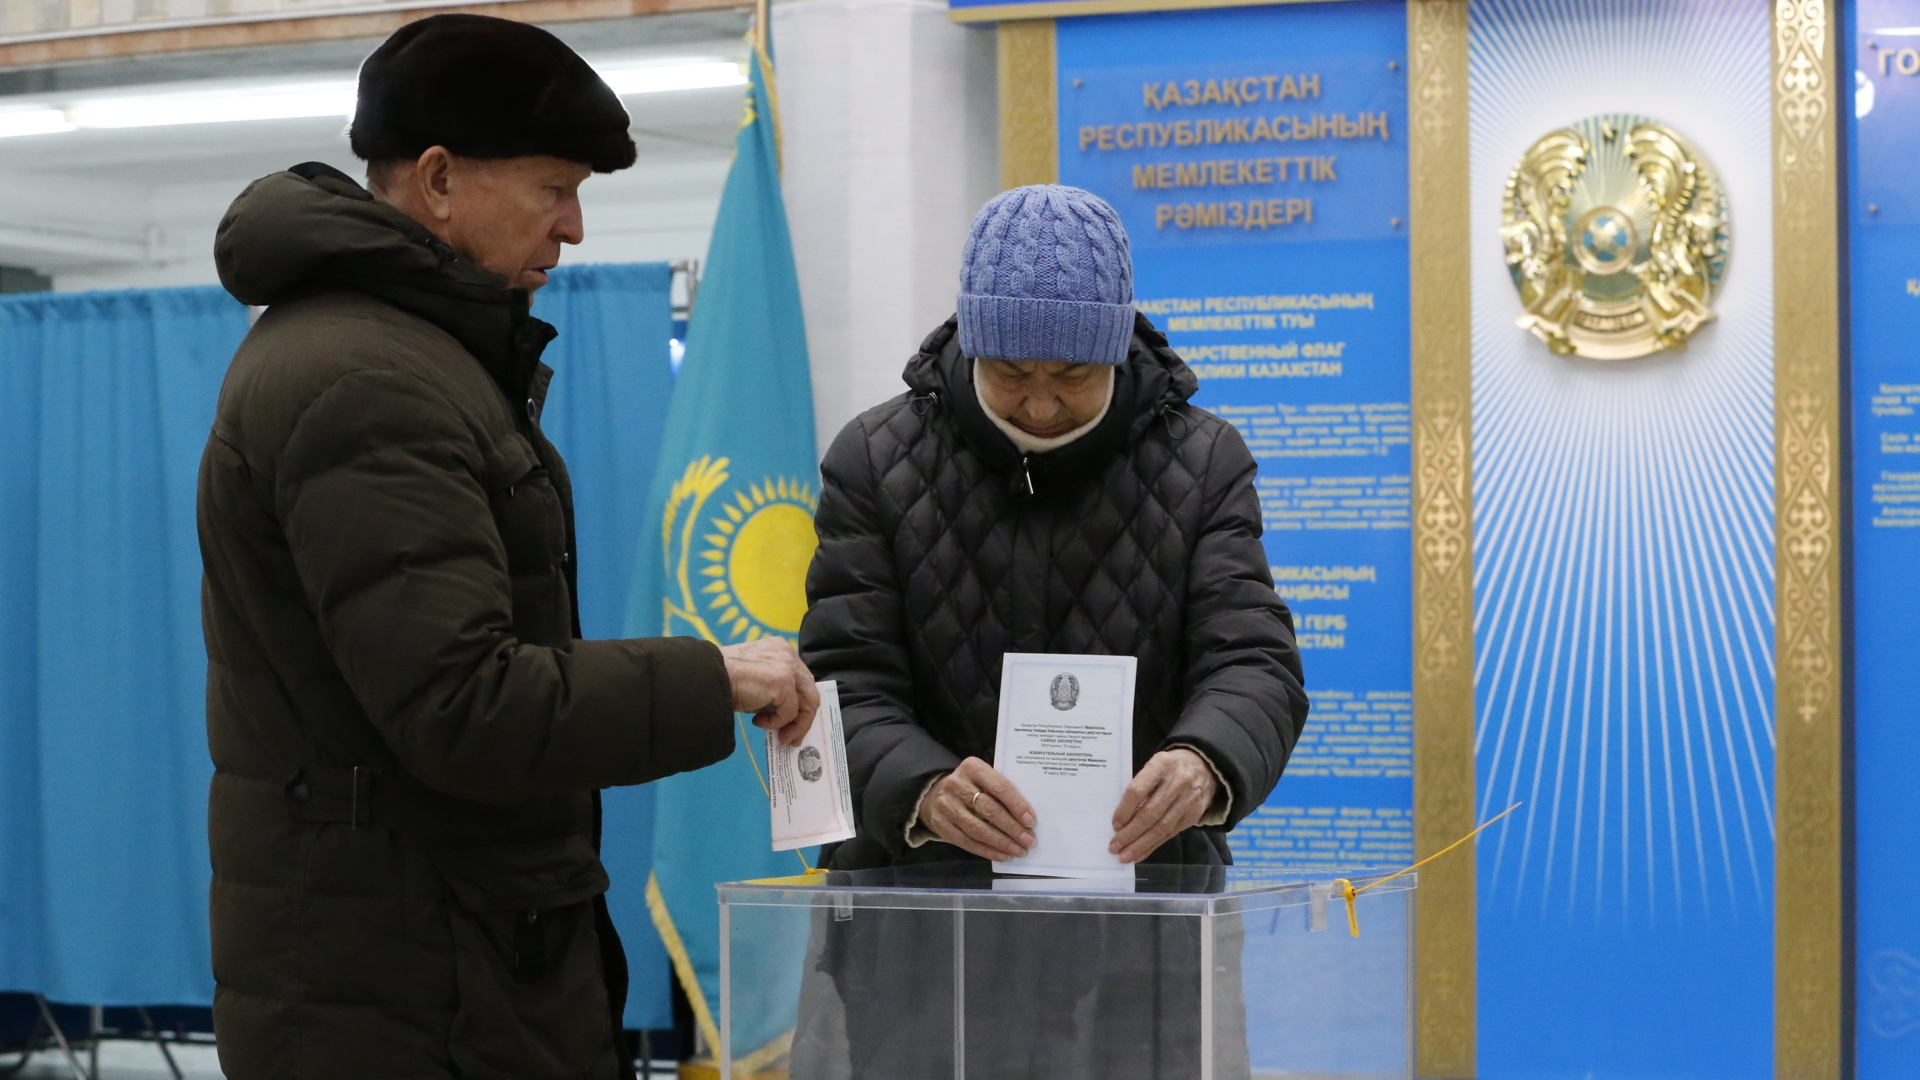 Early voting: Kazakhstan re-elects parliament